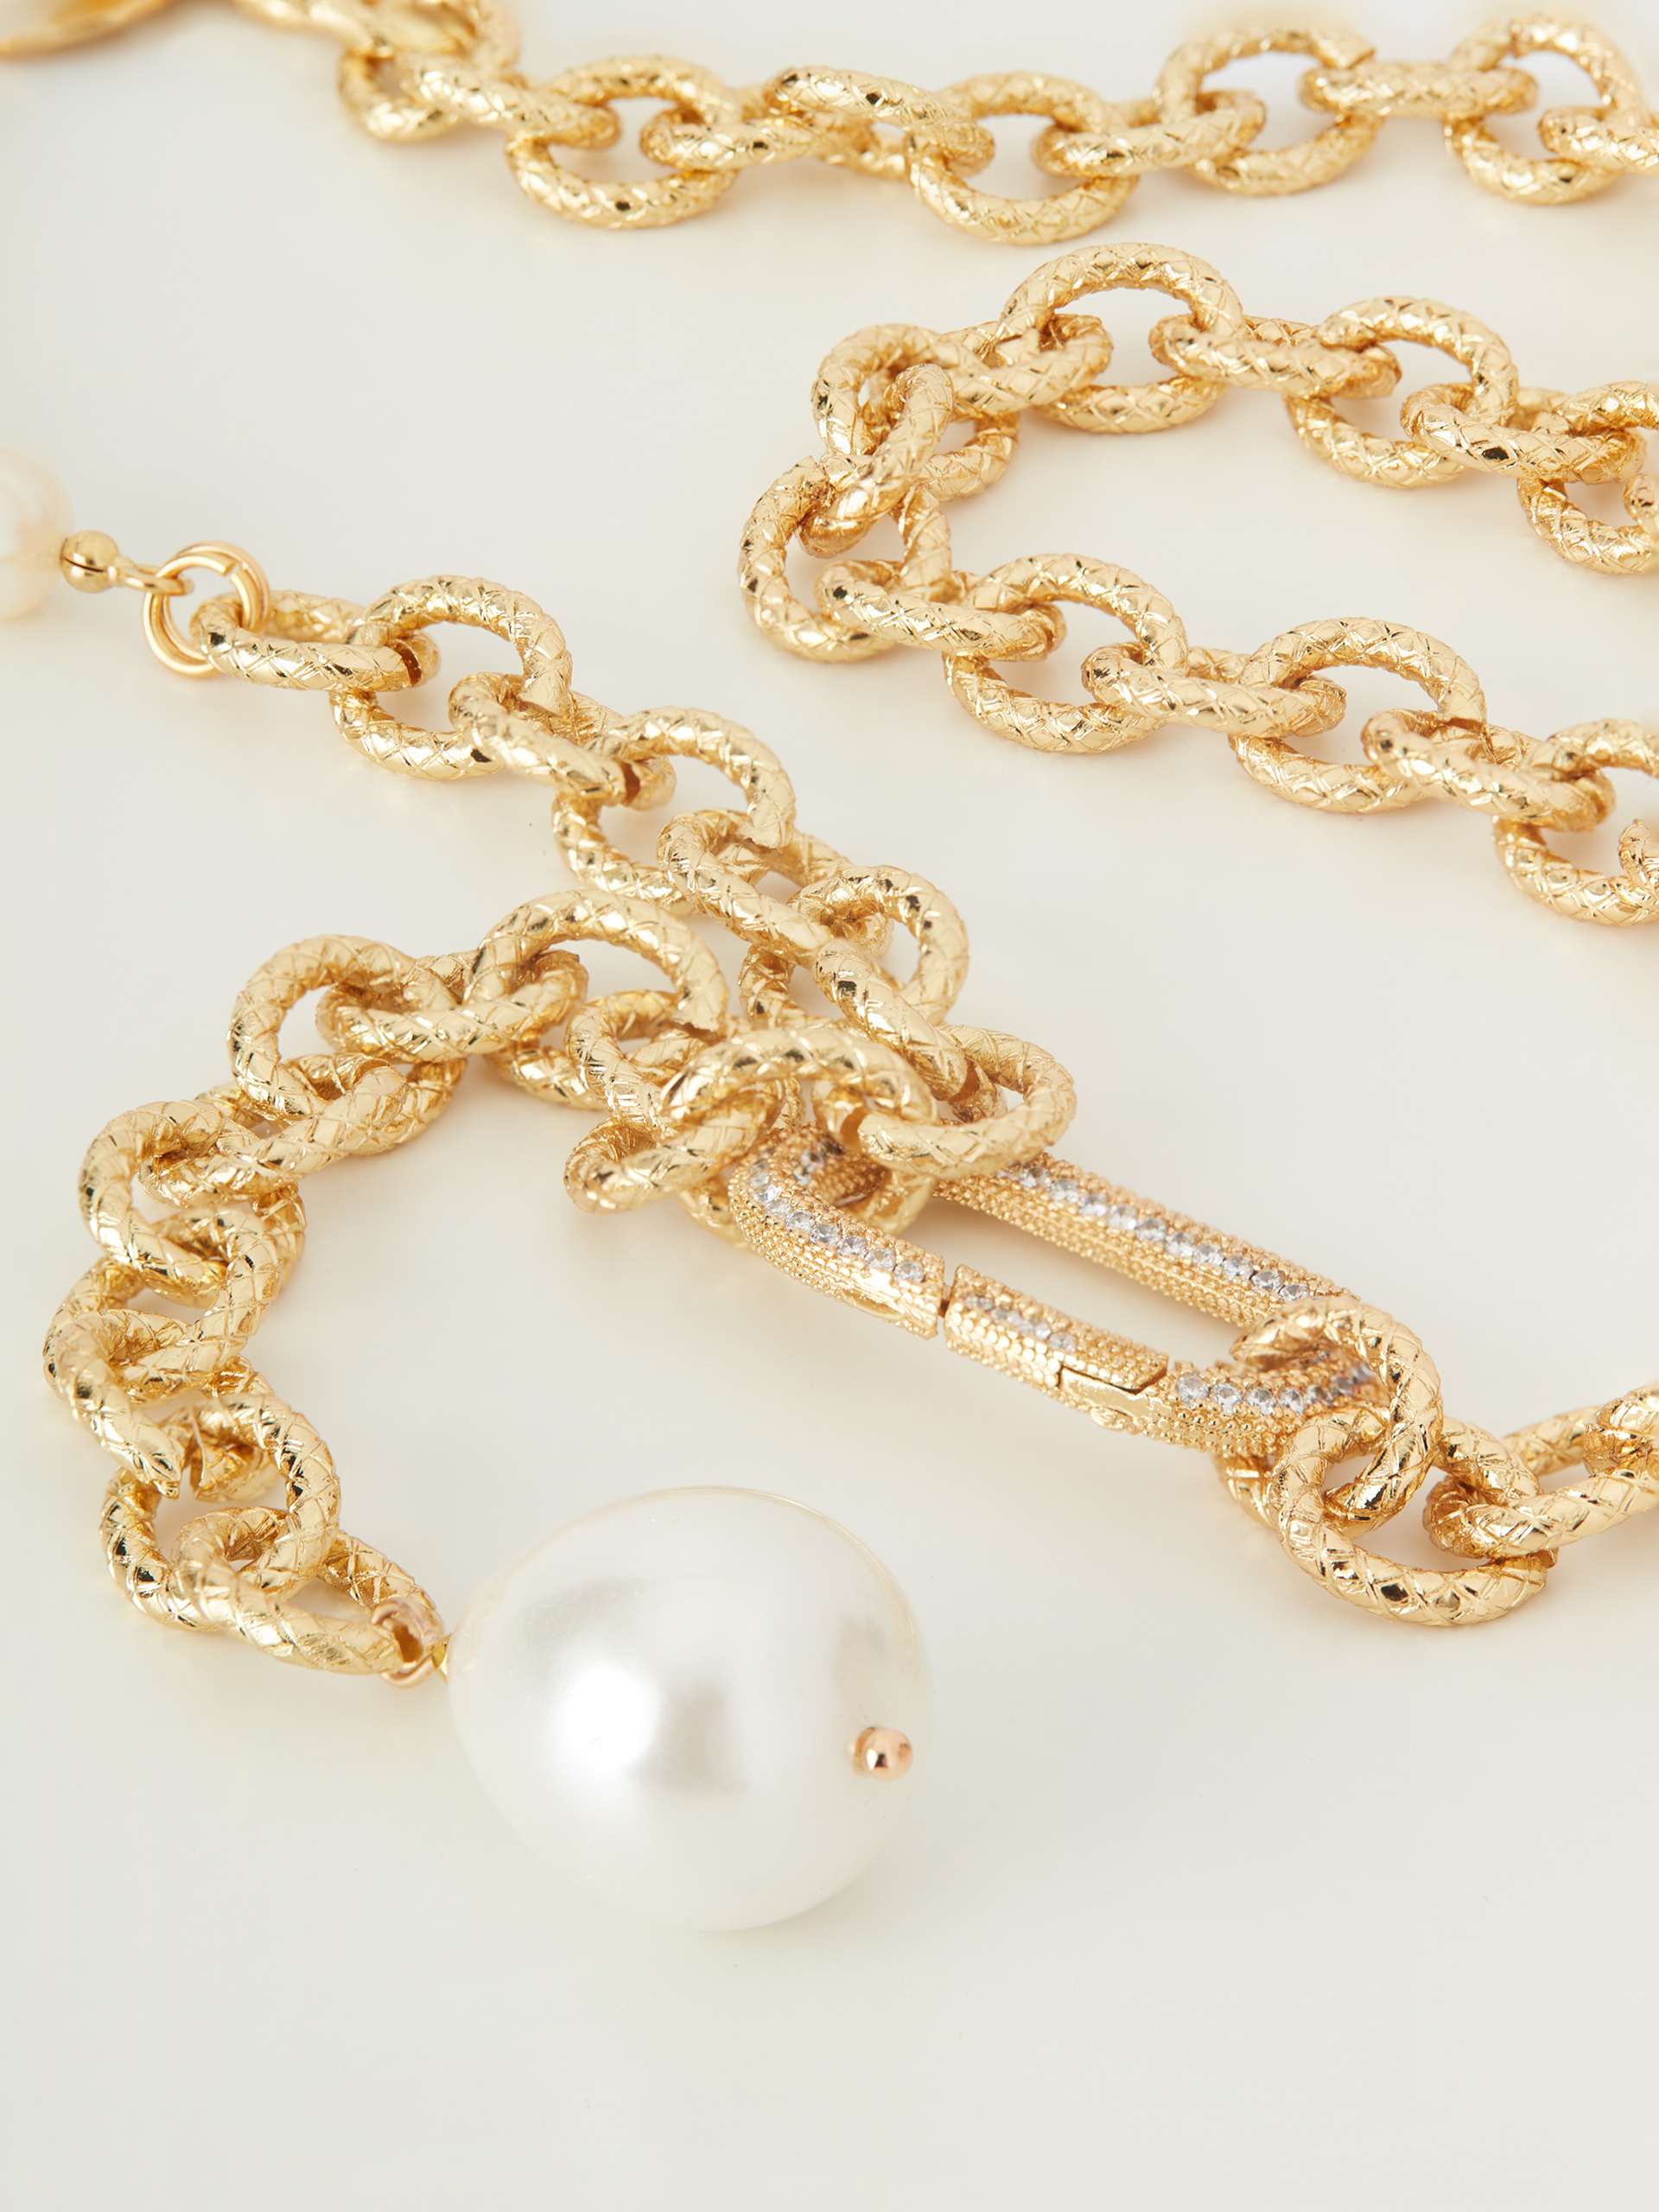 Long necklace with pearls